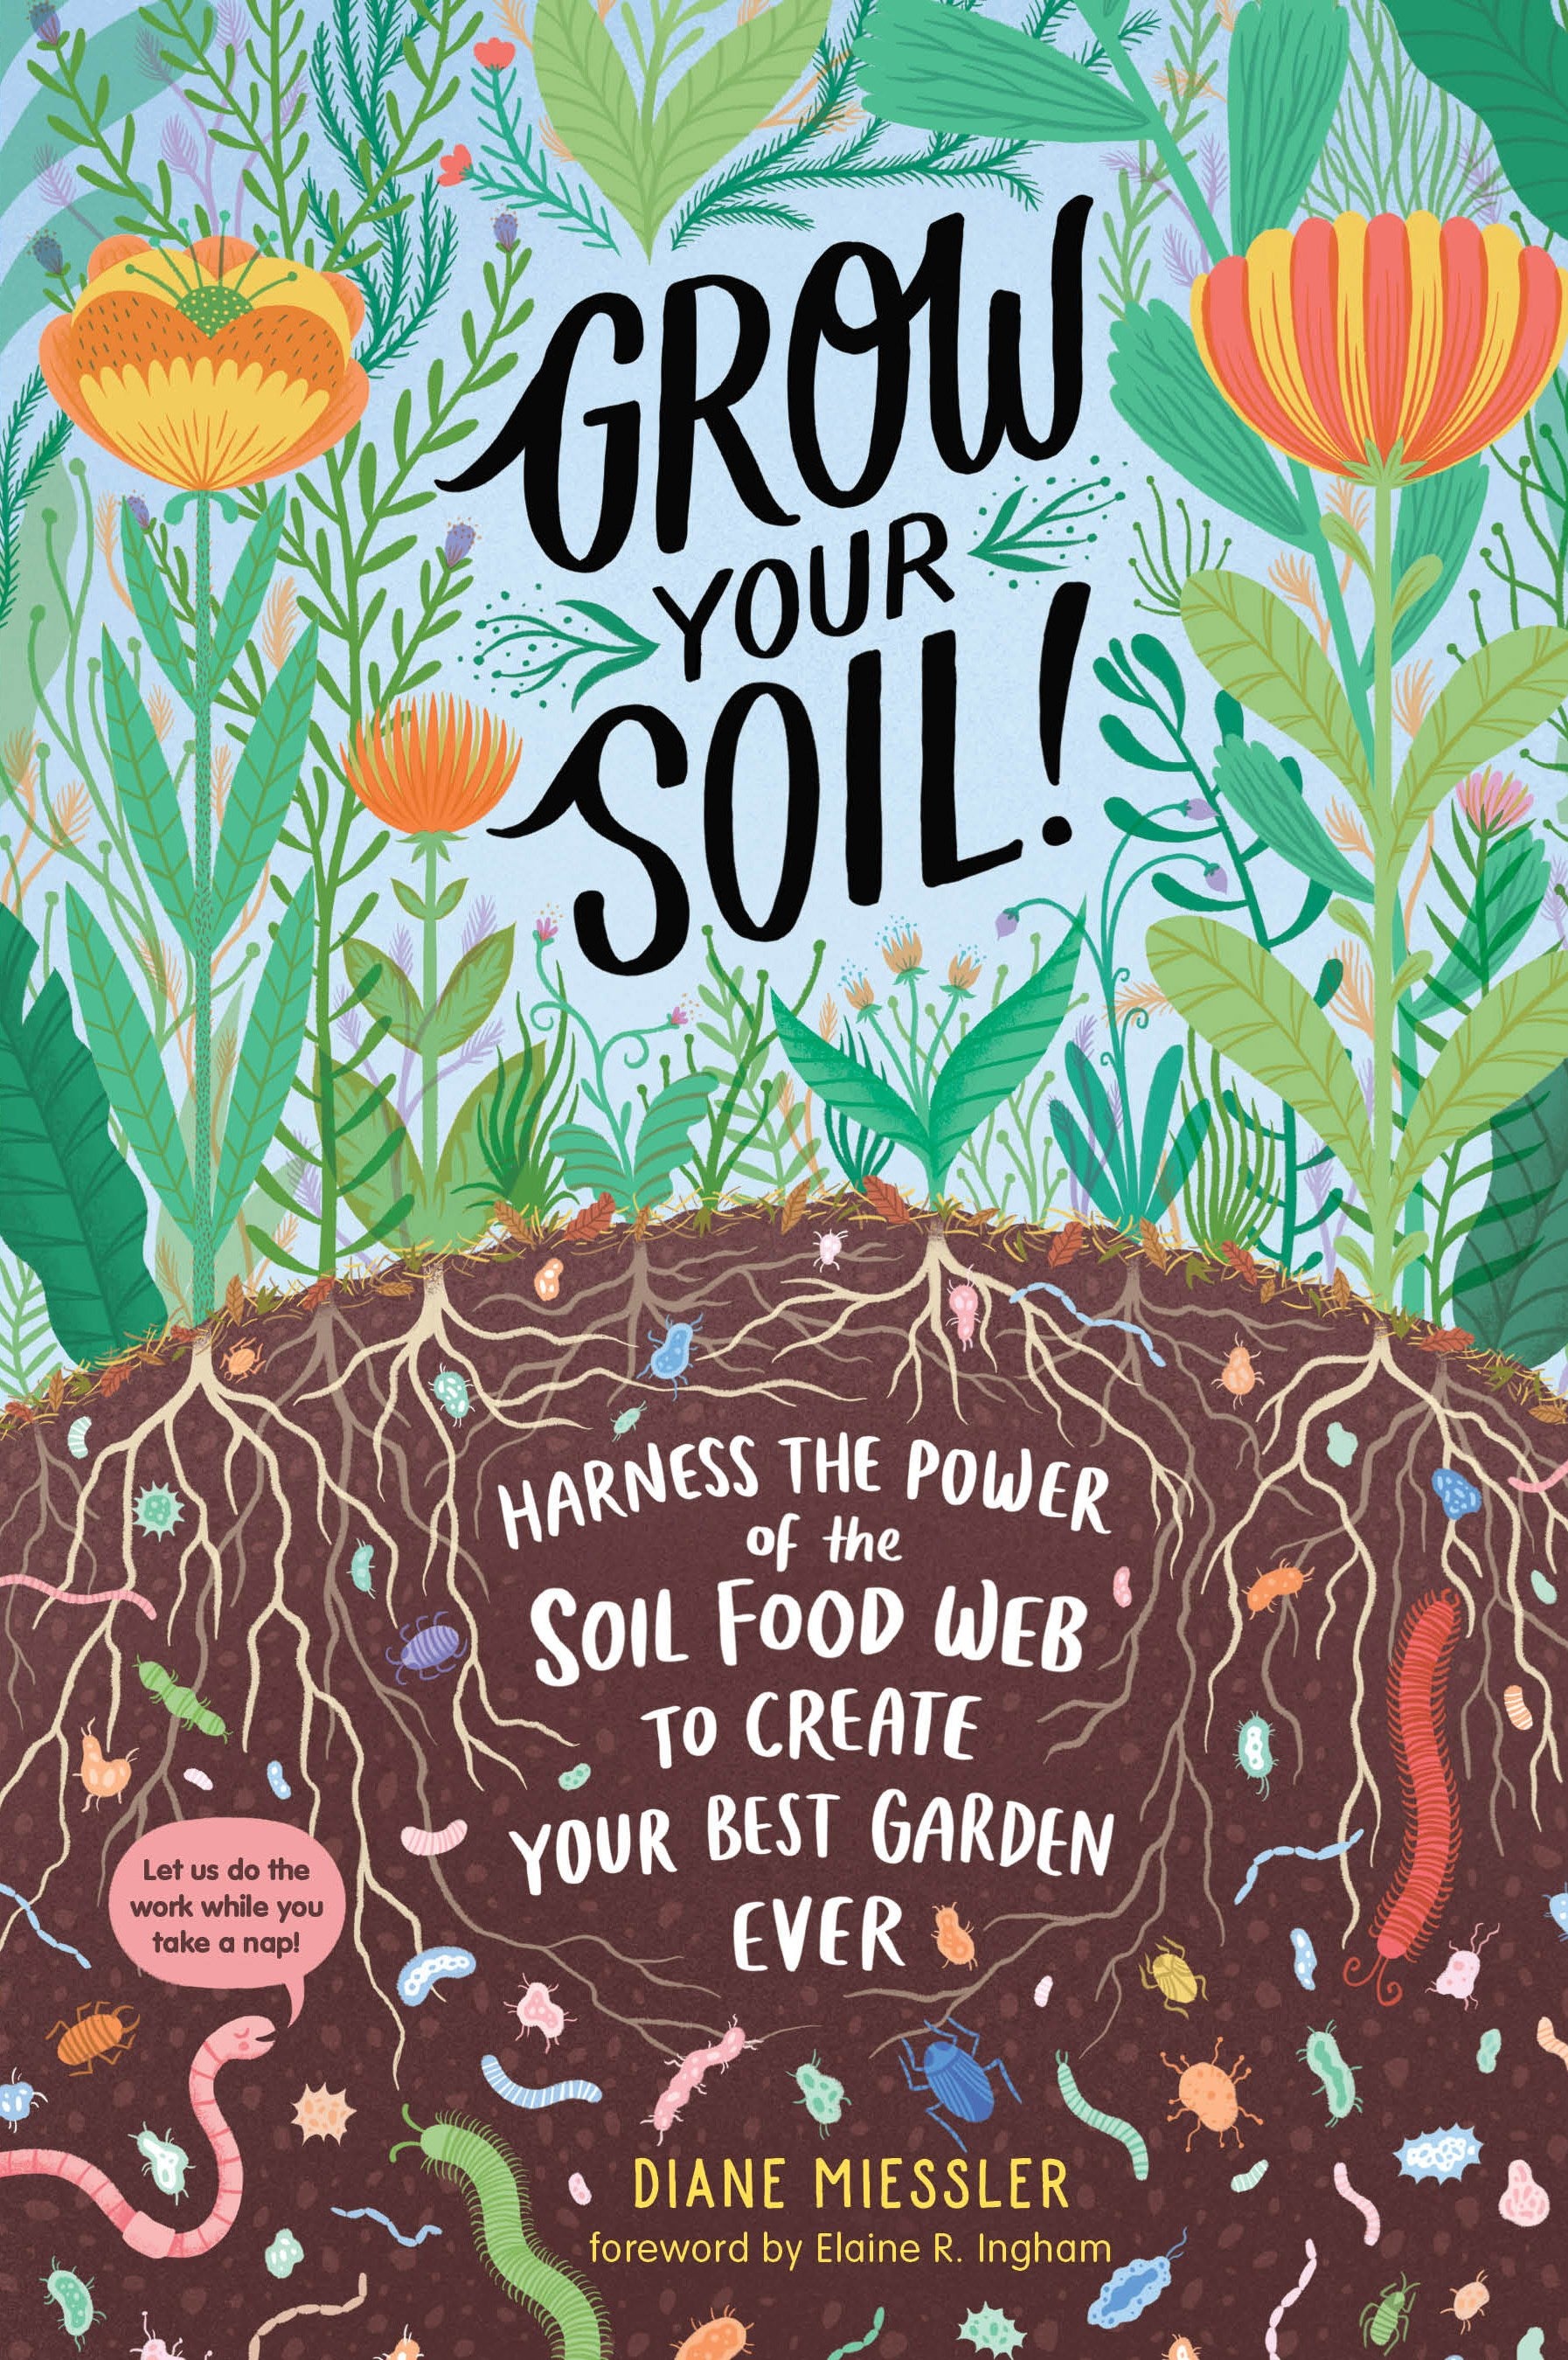 Grow Your Soil!: Harness the Power of the Soil Food Web to Create Your Best Garden Ever